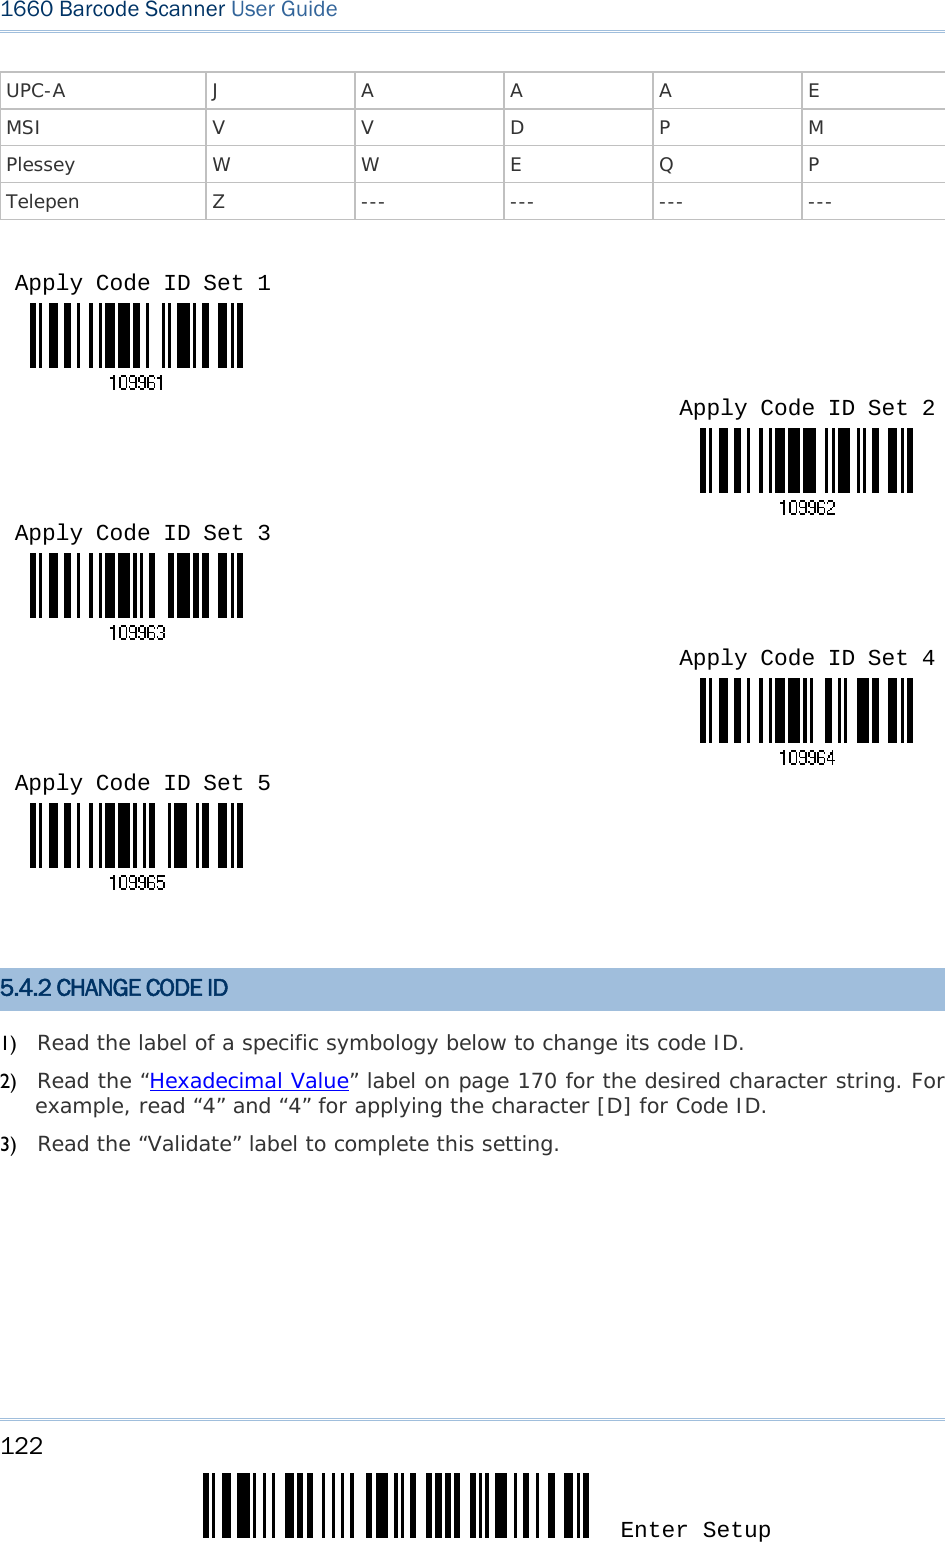 122 Enter Setup 1660 Barcode Scanner User Guide  UPC-A  J  A A A E MSI V V D P M Plessey W W E Q P Telepen  Z  --- --- --- ---          5.4.2 CHANGE CODE ID 1) Read the label of a specific symbology below to change its code ID. 2) Read the “Hexadecimal Value” label on page 170 for the desired character string. For example, read “4” and “4” for applying the character [D] for Code ID. 3) Read the “Validate” label to complete this setting. Apply Code ID Set 1 Apply Code ID Set 2Apply Code ID Set 3 Apply Code ID Set 4Apply Code ID Set 5 